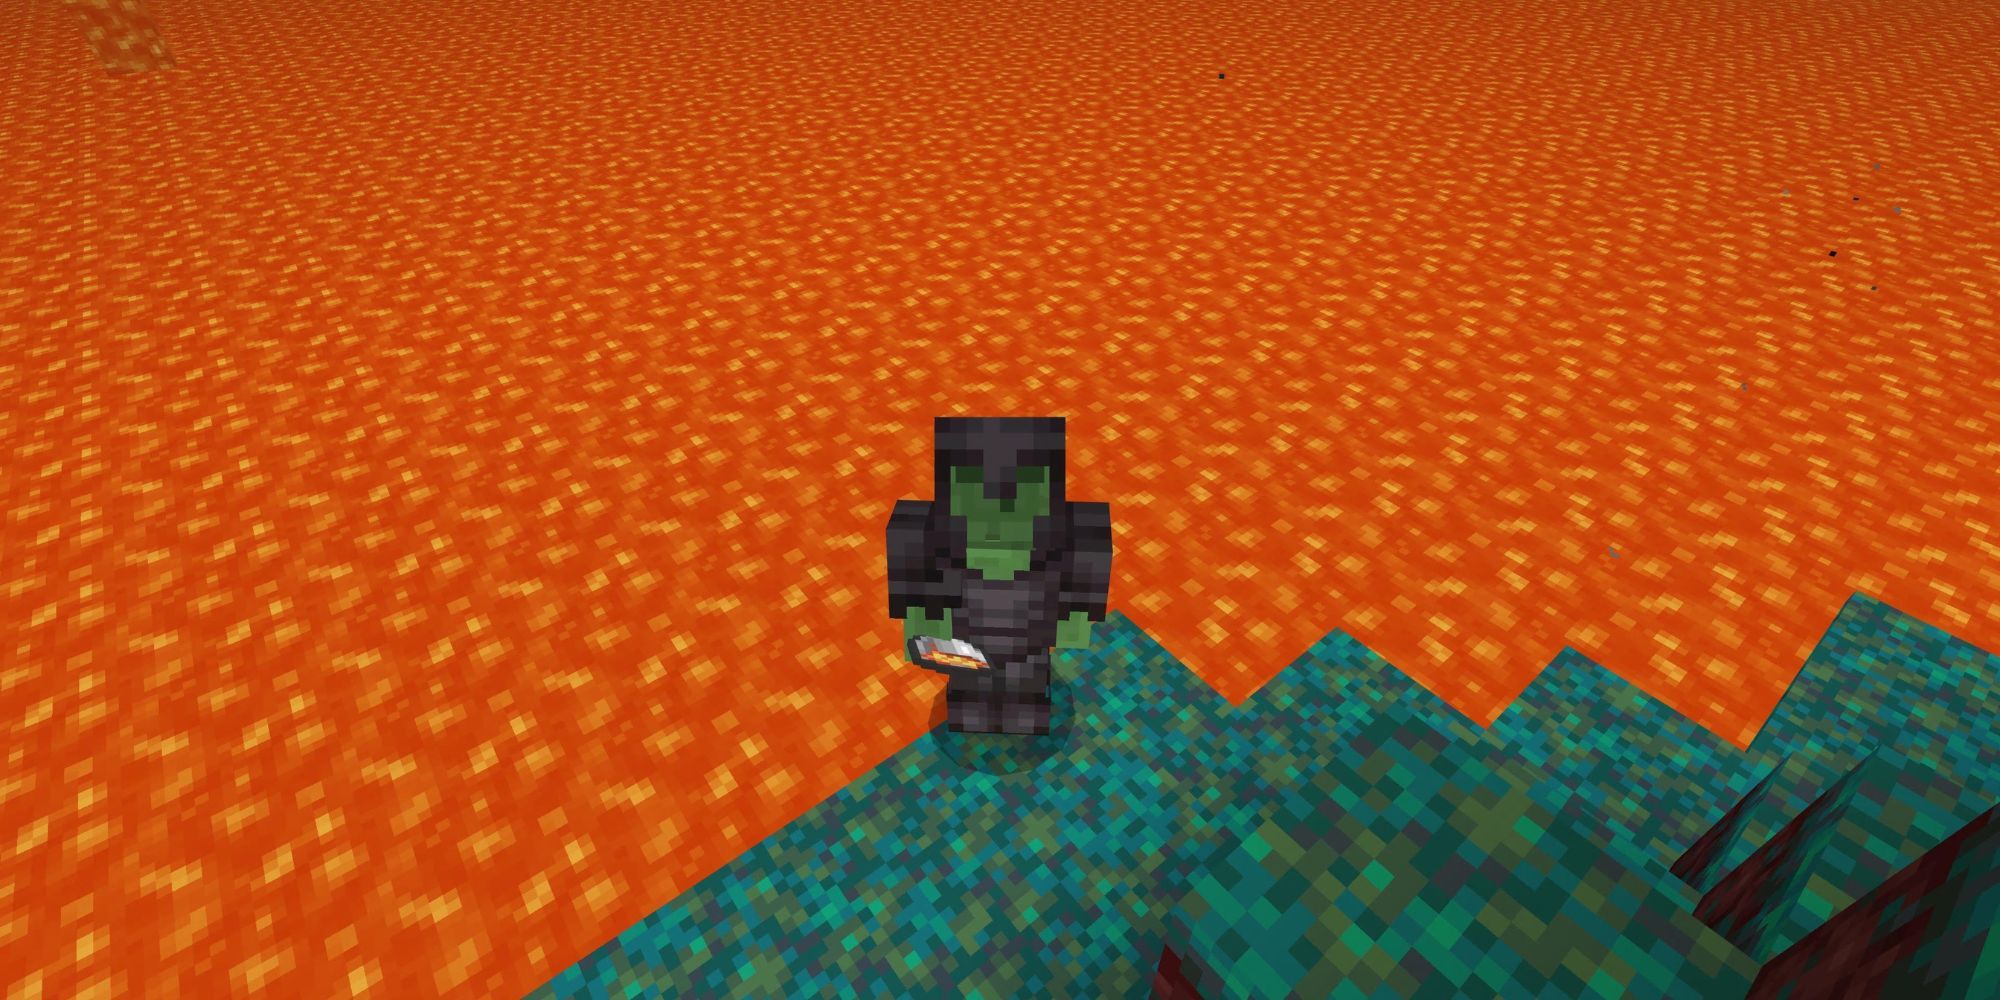 A player standing next to lava holding a lava bucket in Minecraft